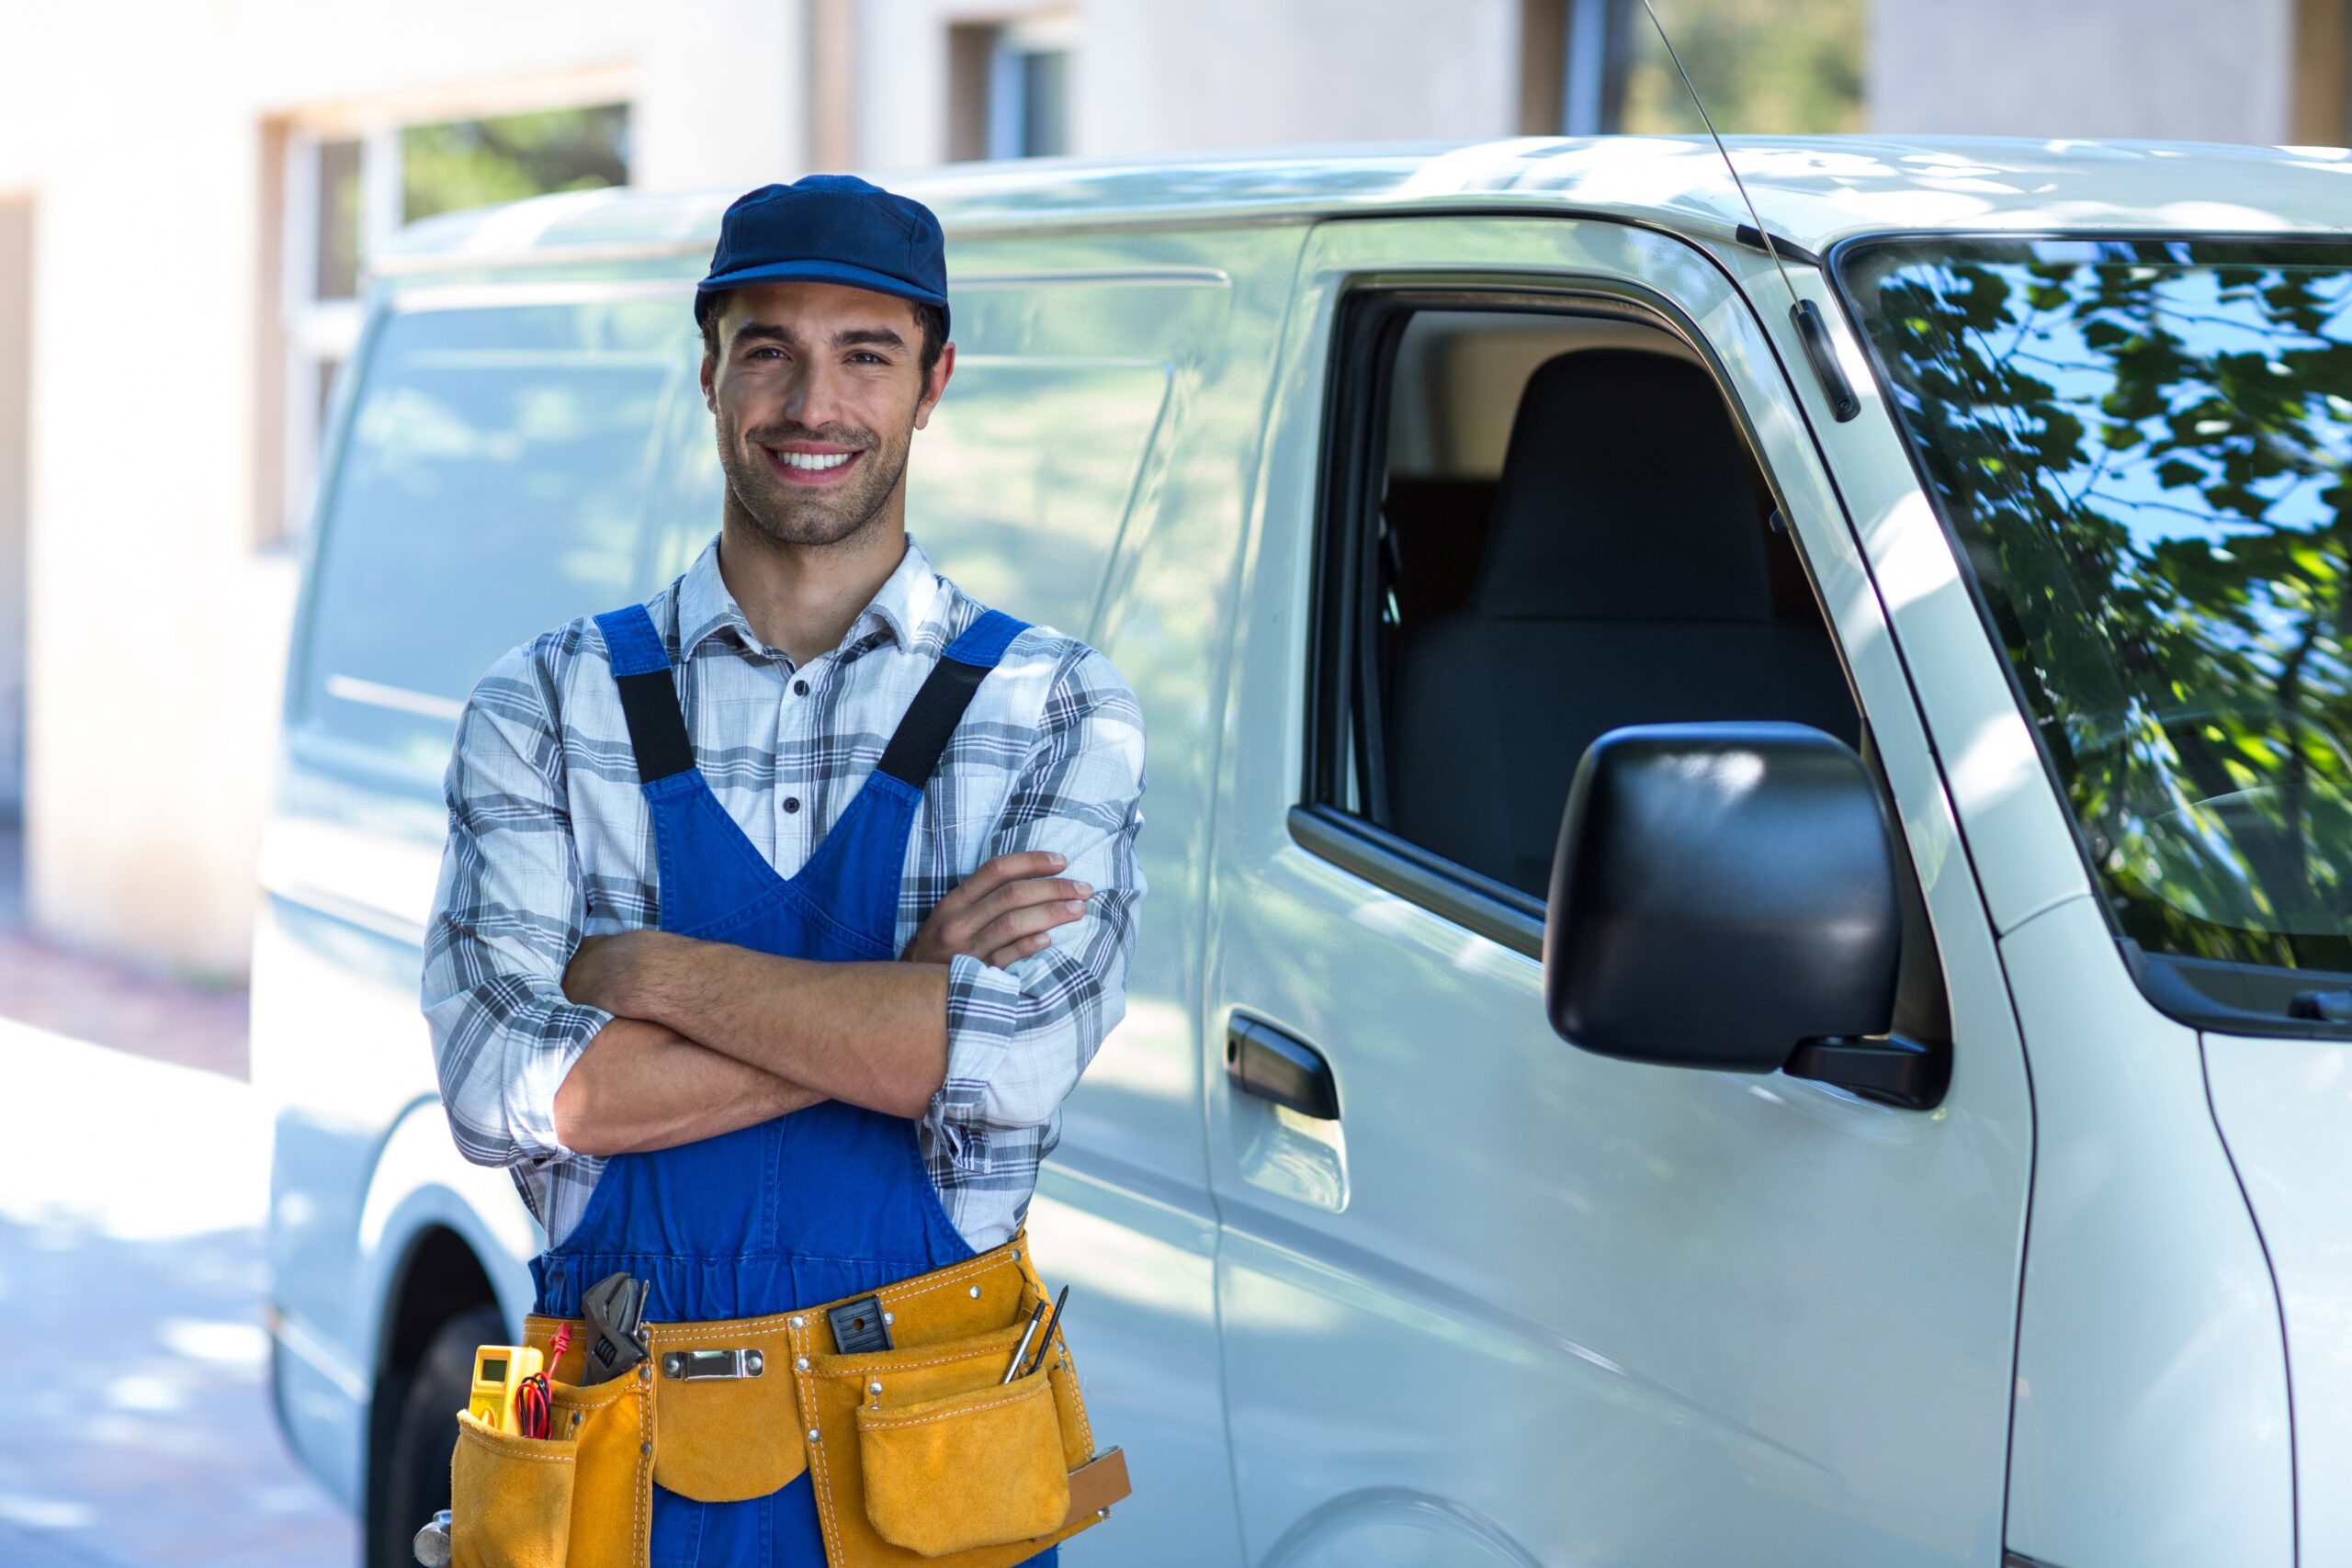 Maintenance technician in a yellow work belt and blue hat stands in front of his white work van with arms crossed